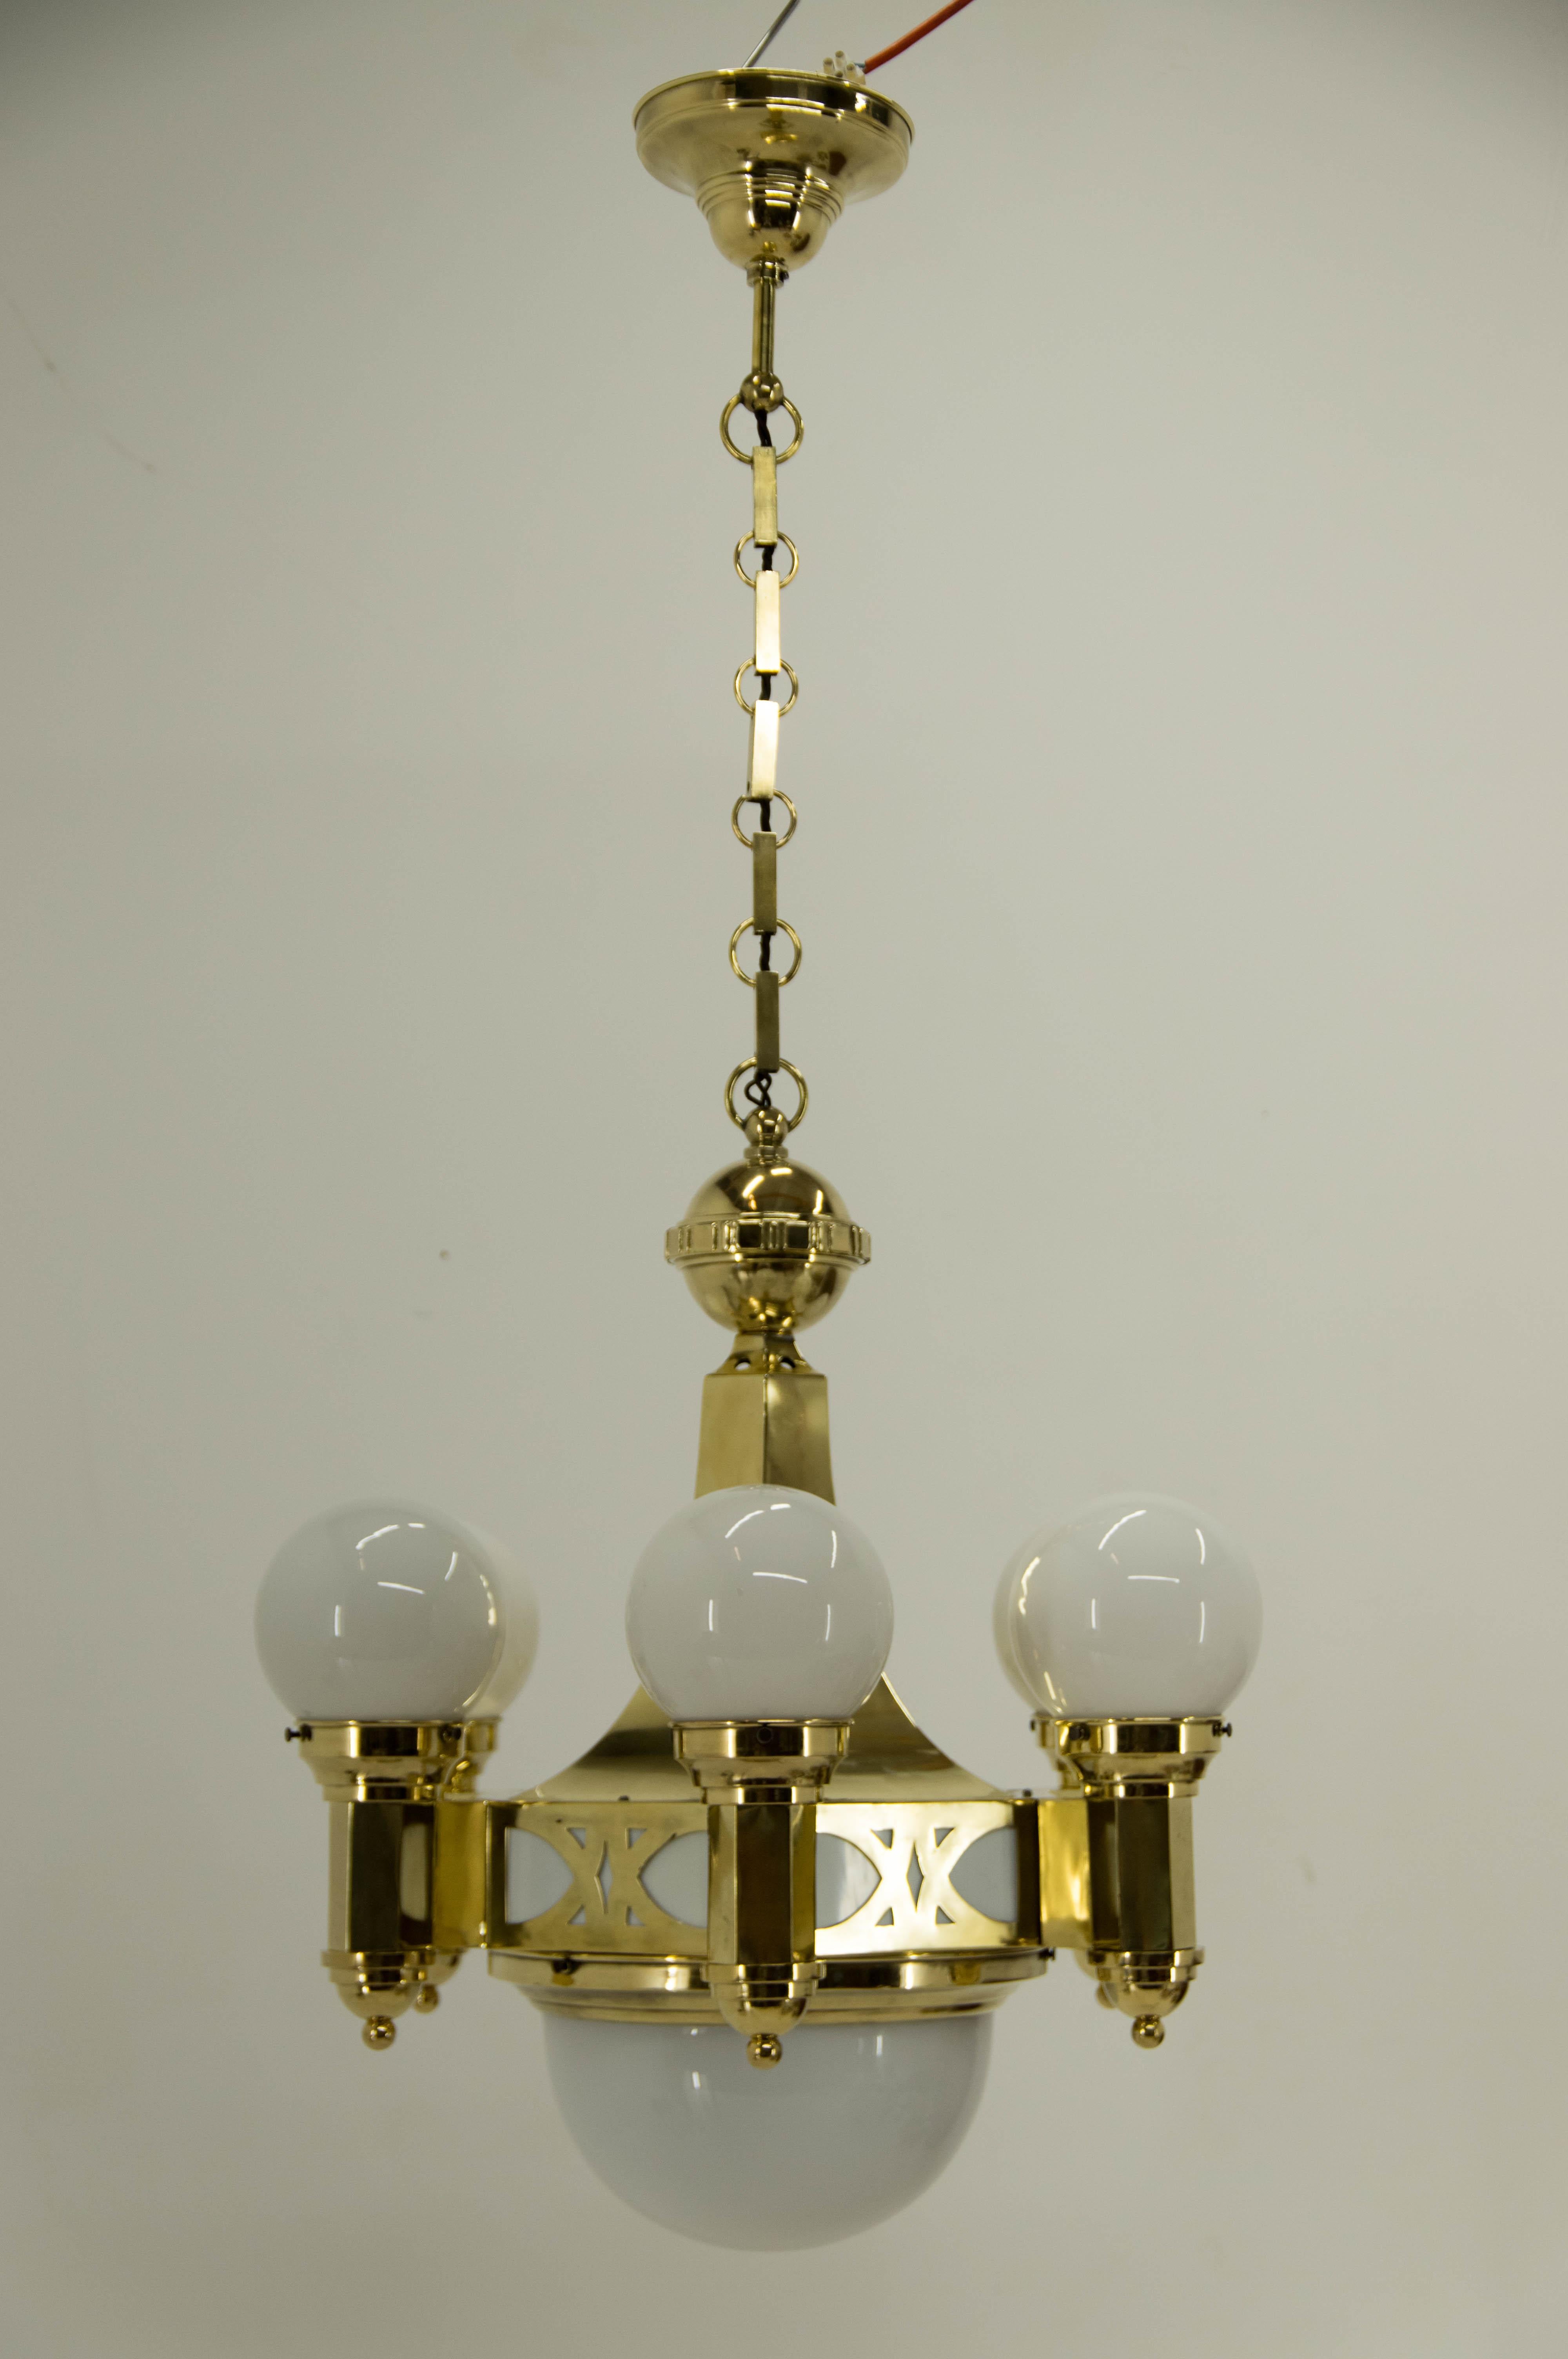 Very rare late Art Nouveau brass chandelier designed by architect Emil Kralik. 
Probably manufactured in Vulkania Prostejov where Kralik was a director.
Item was completely restored, brass refinished and polished.
One cca 3cm crack on one arm was